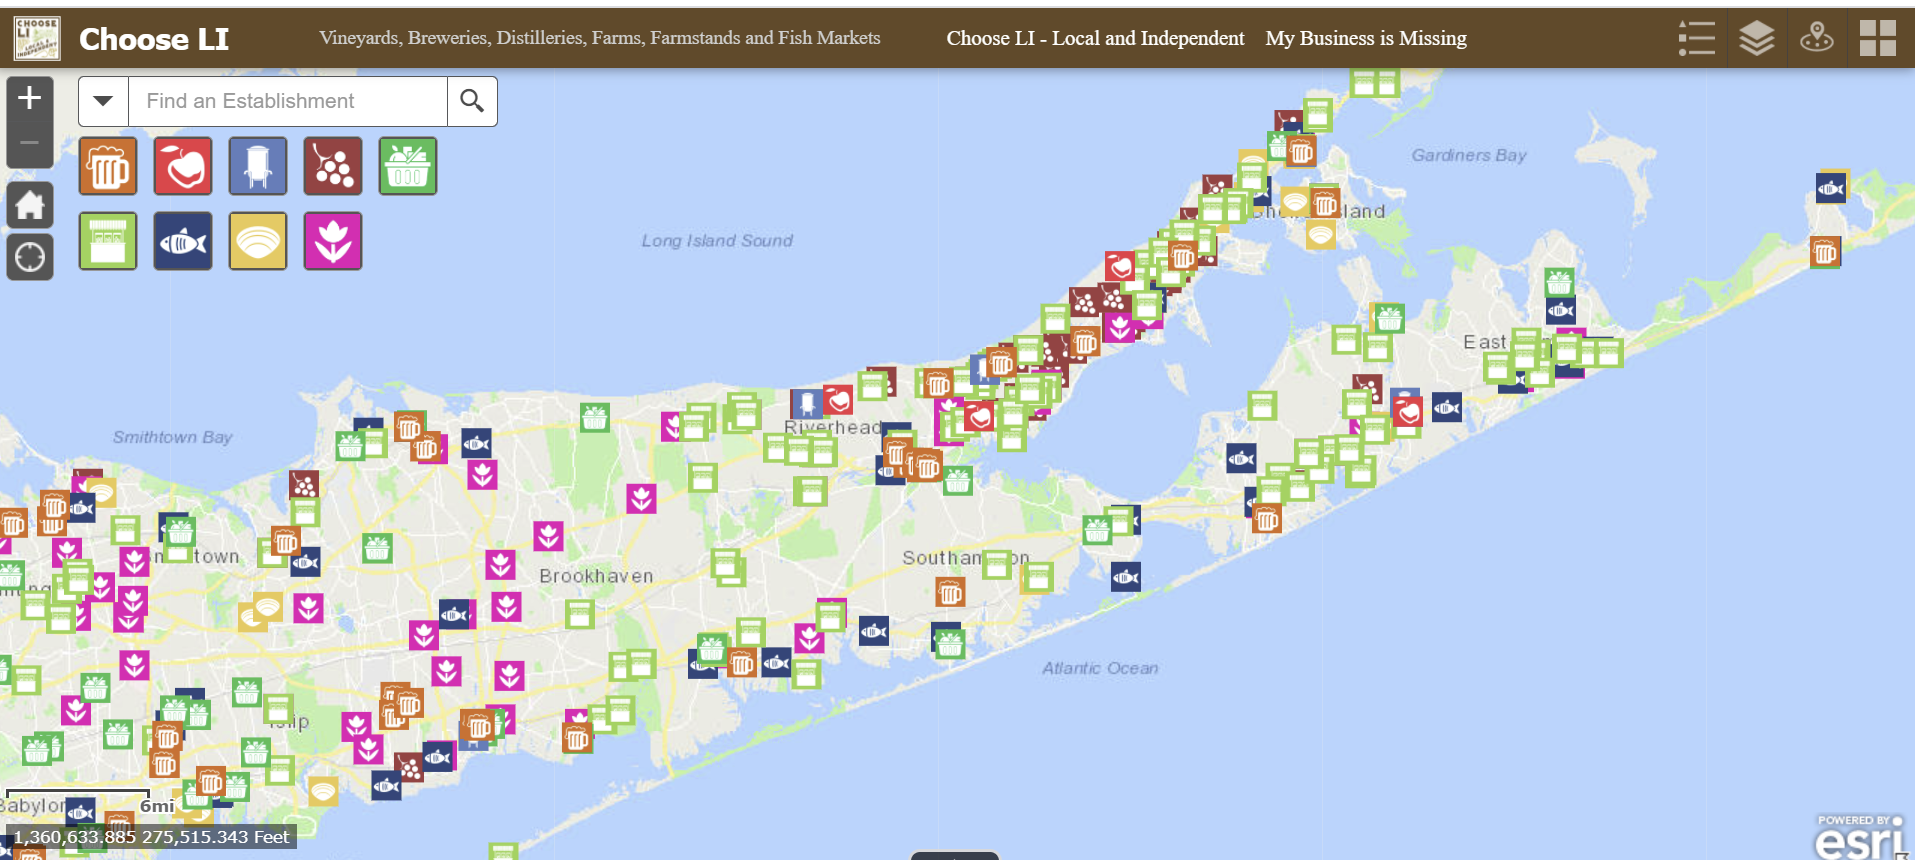 A map from Choose LI with the locations of where you can purchase locally produced food on Long Island